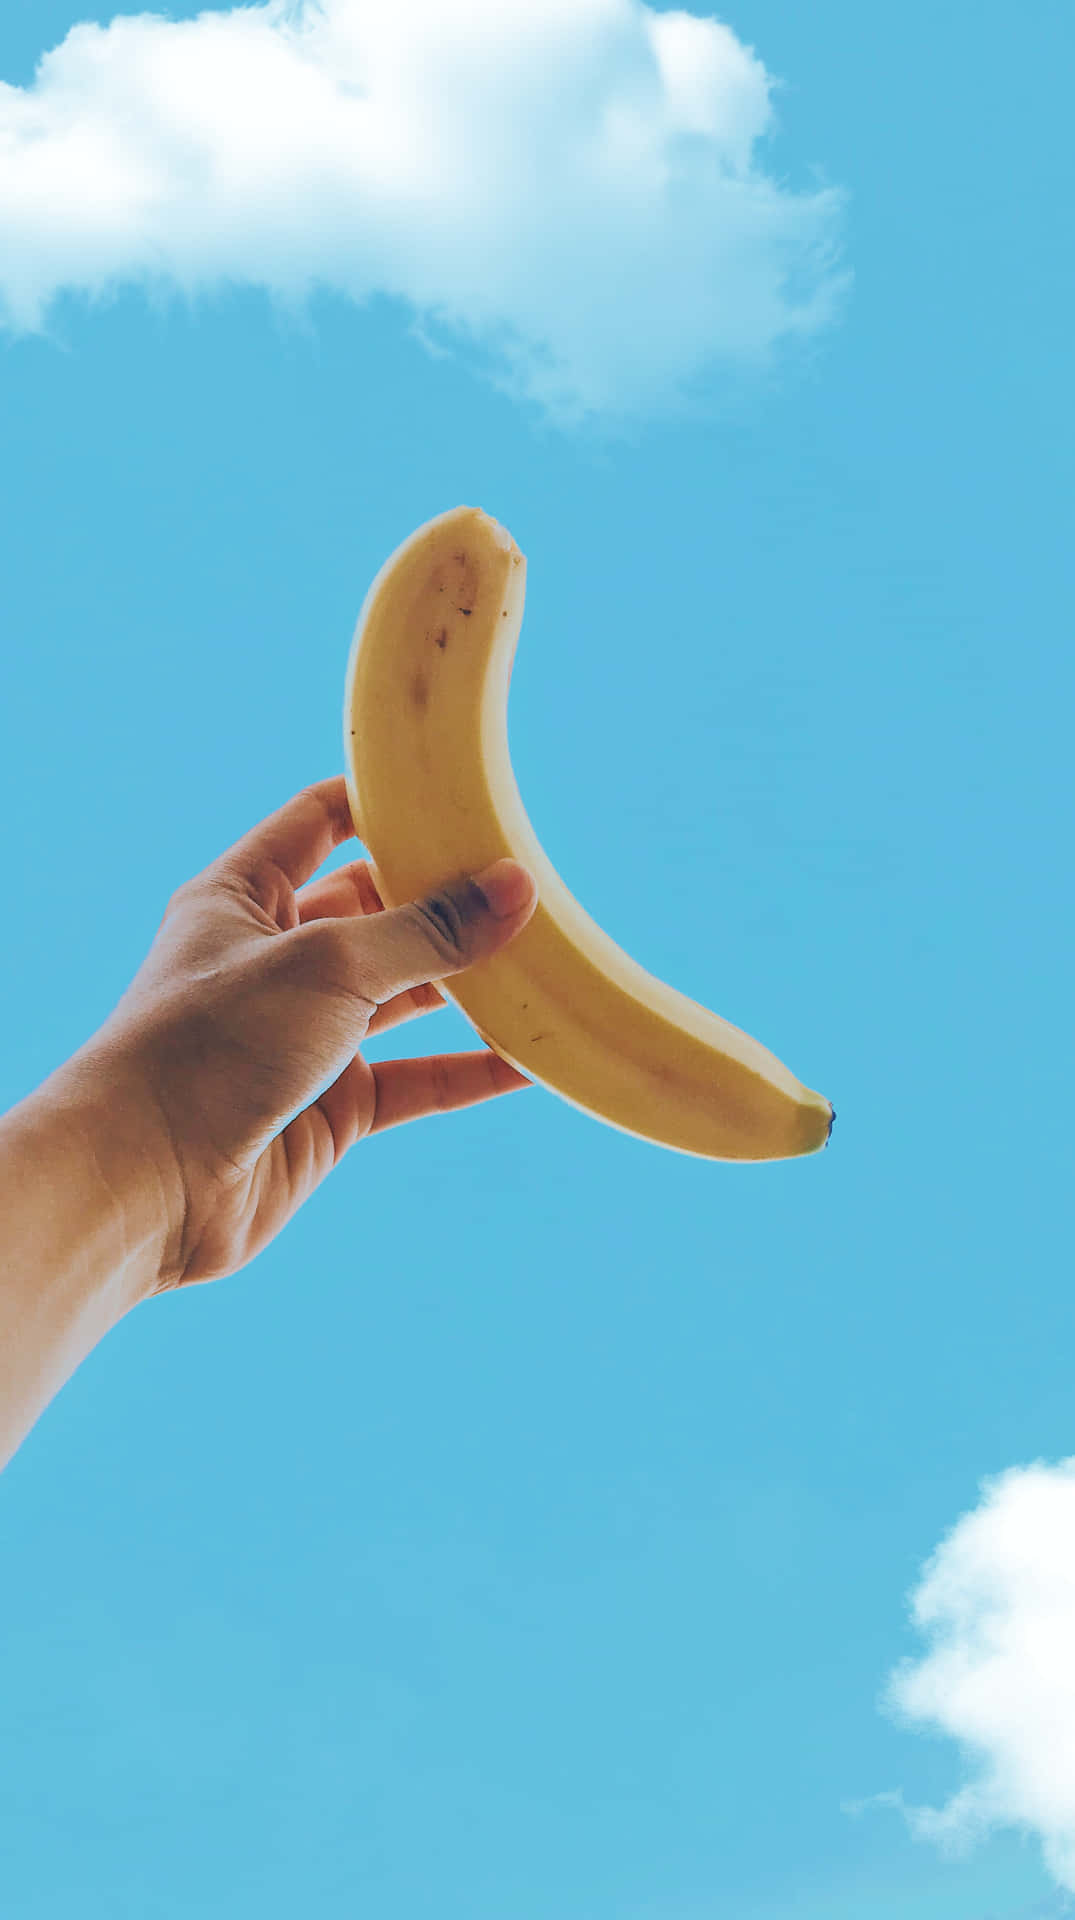 Refresh yourself with a vibrant yellow banana.